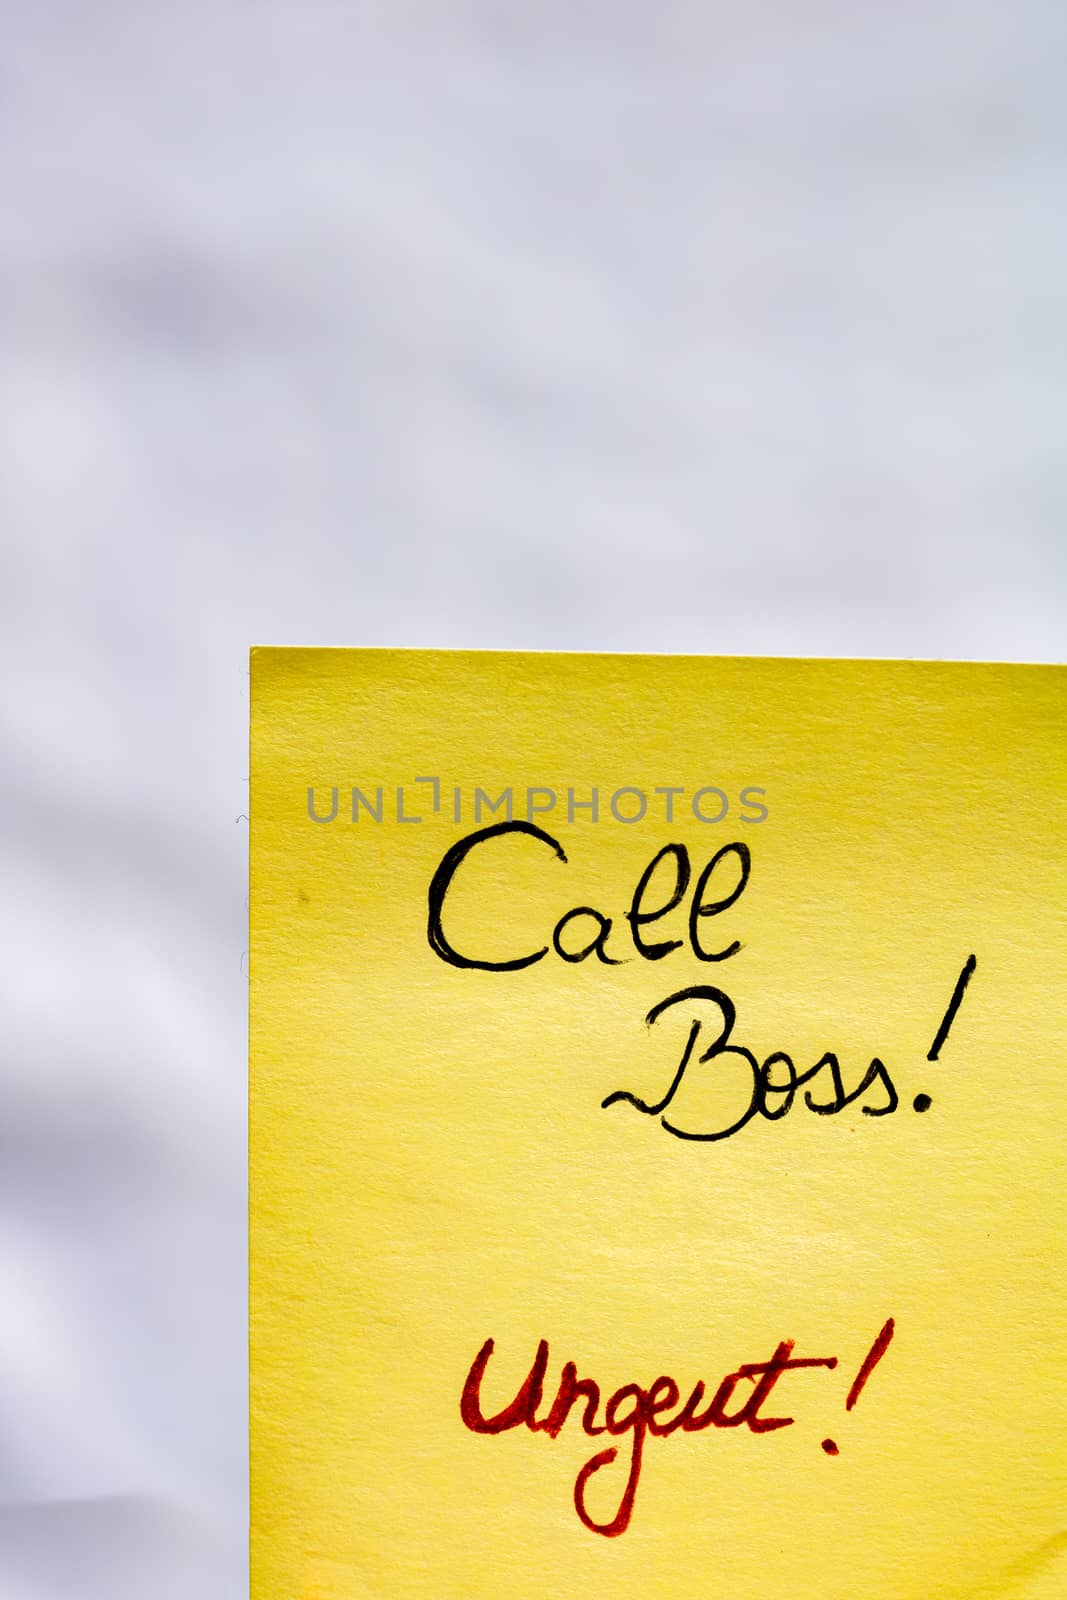 Call boss handwriting text close up isolated on yellow paper wit by vladispas